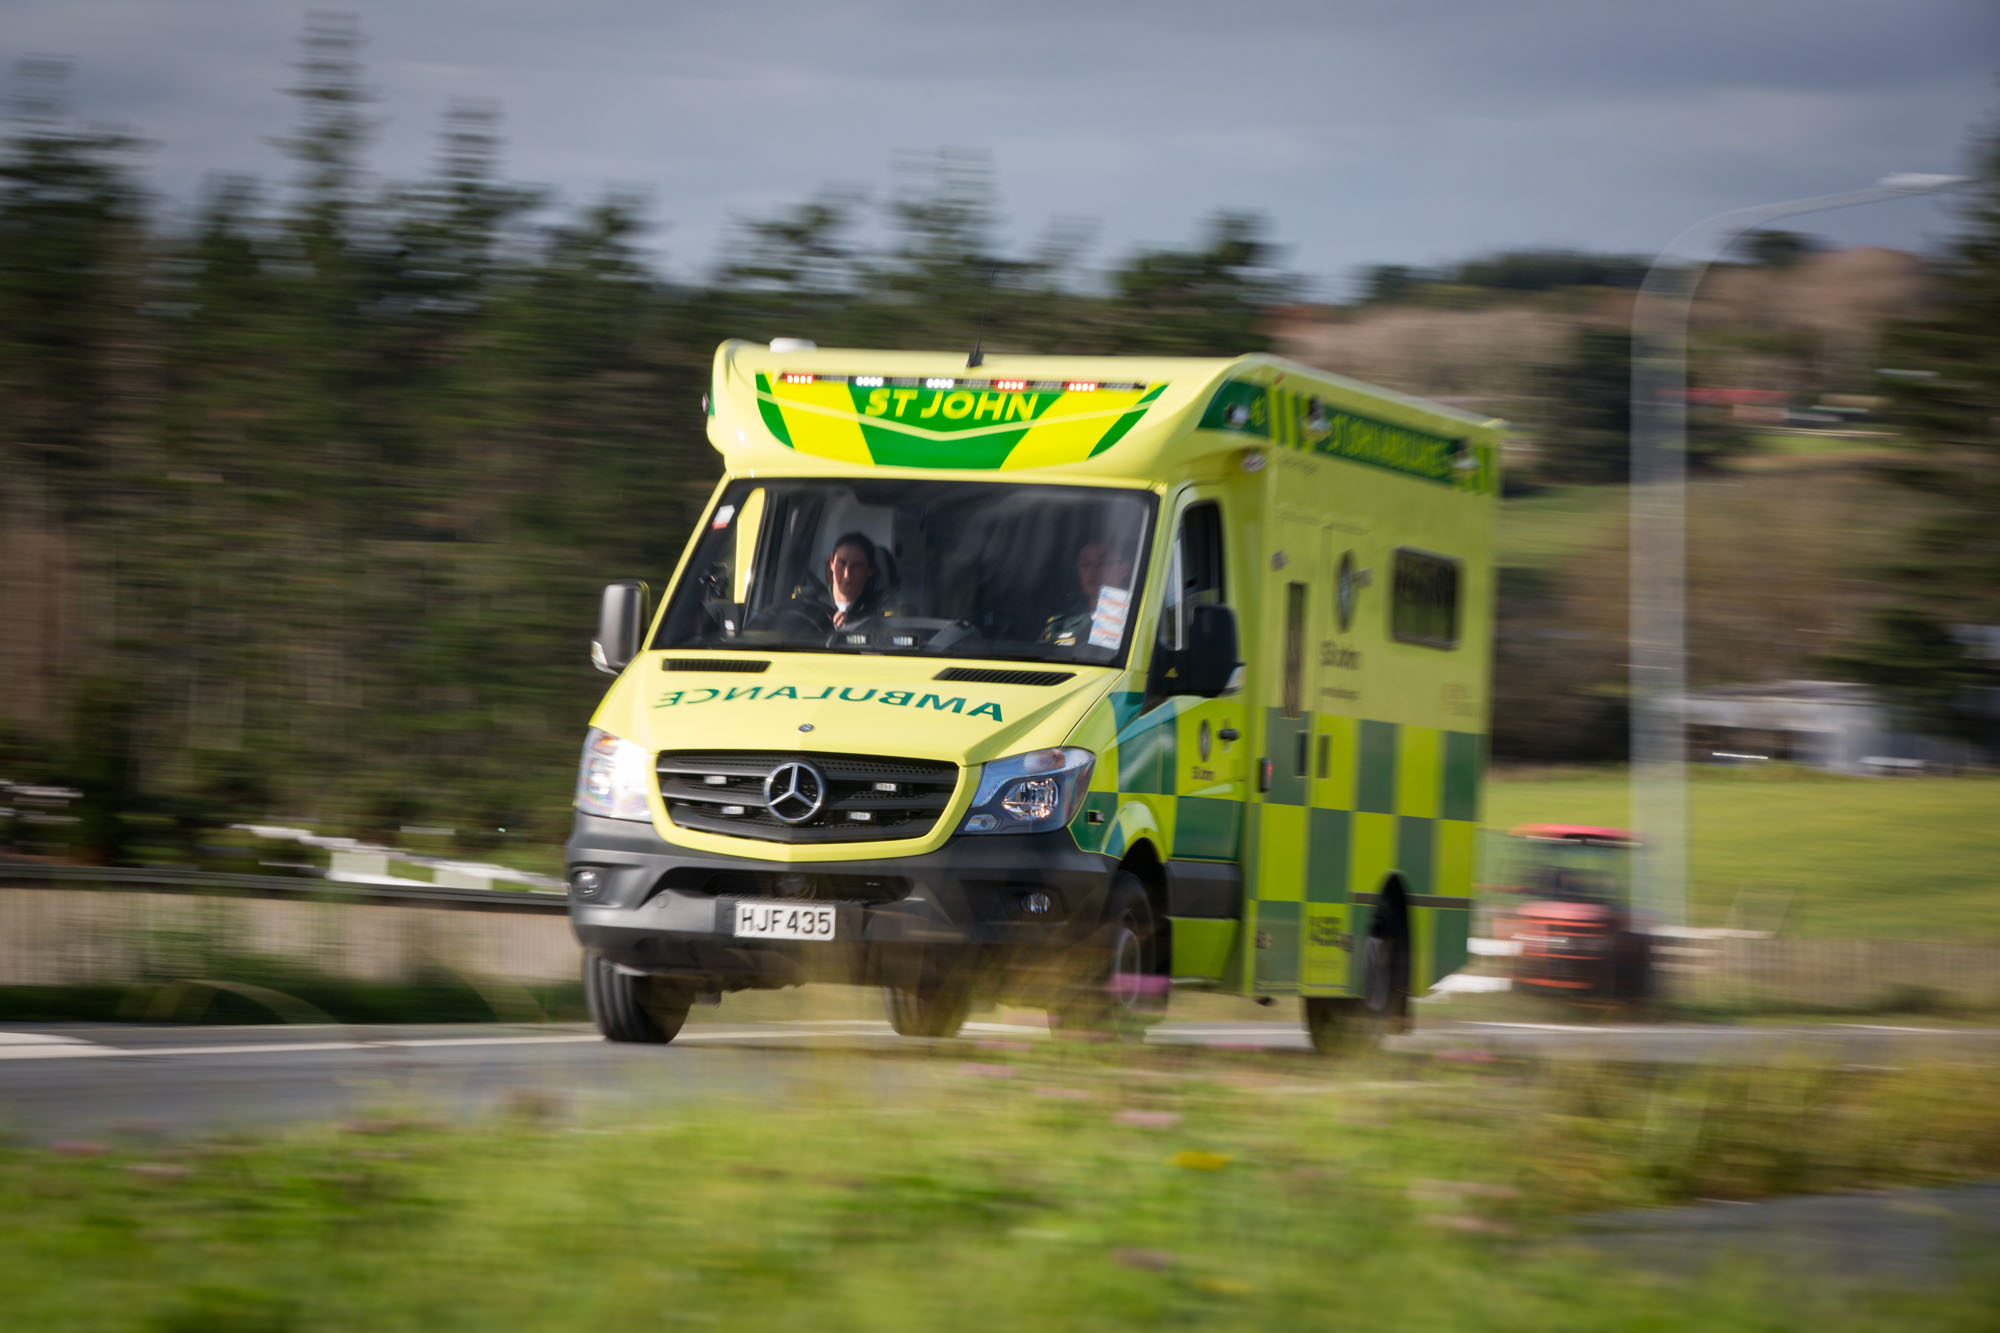 Look out for ambulances to save critical seconds.